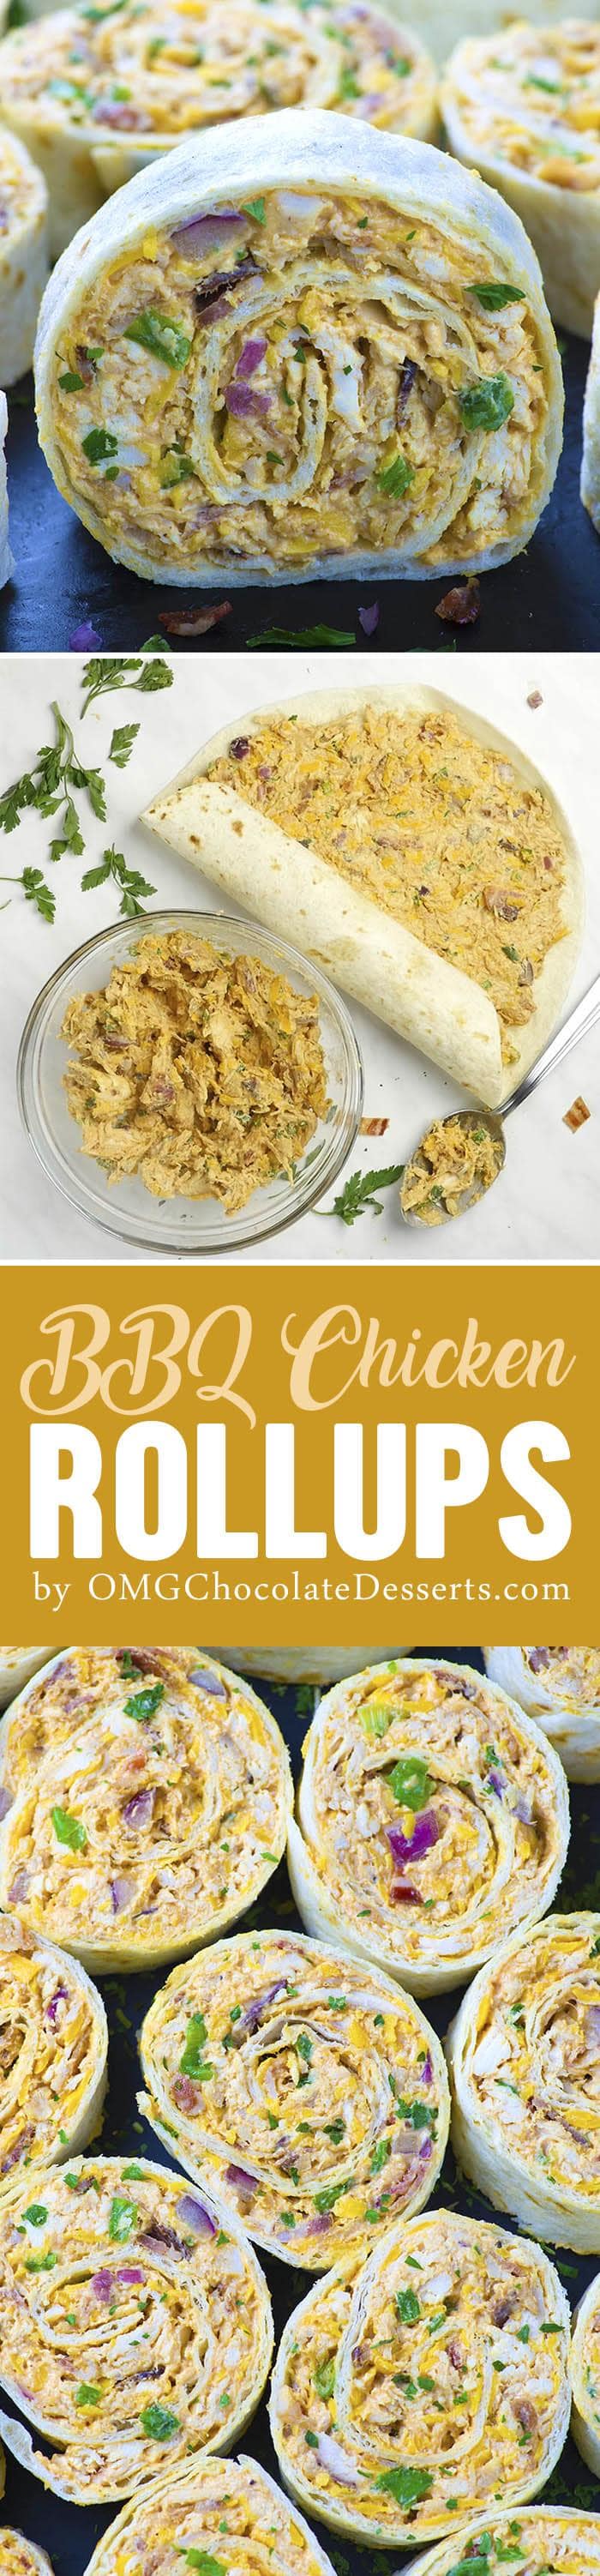 BBQ Chicken Roll Ups is quick and easy, make ahead appetizer for a crowd! It’s great Super bowl food idea, but, these cheesy chicken, BBQ sauce and tortilla pinwheels are great for lunch box or delicious appetizers for a party, too.